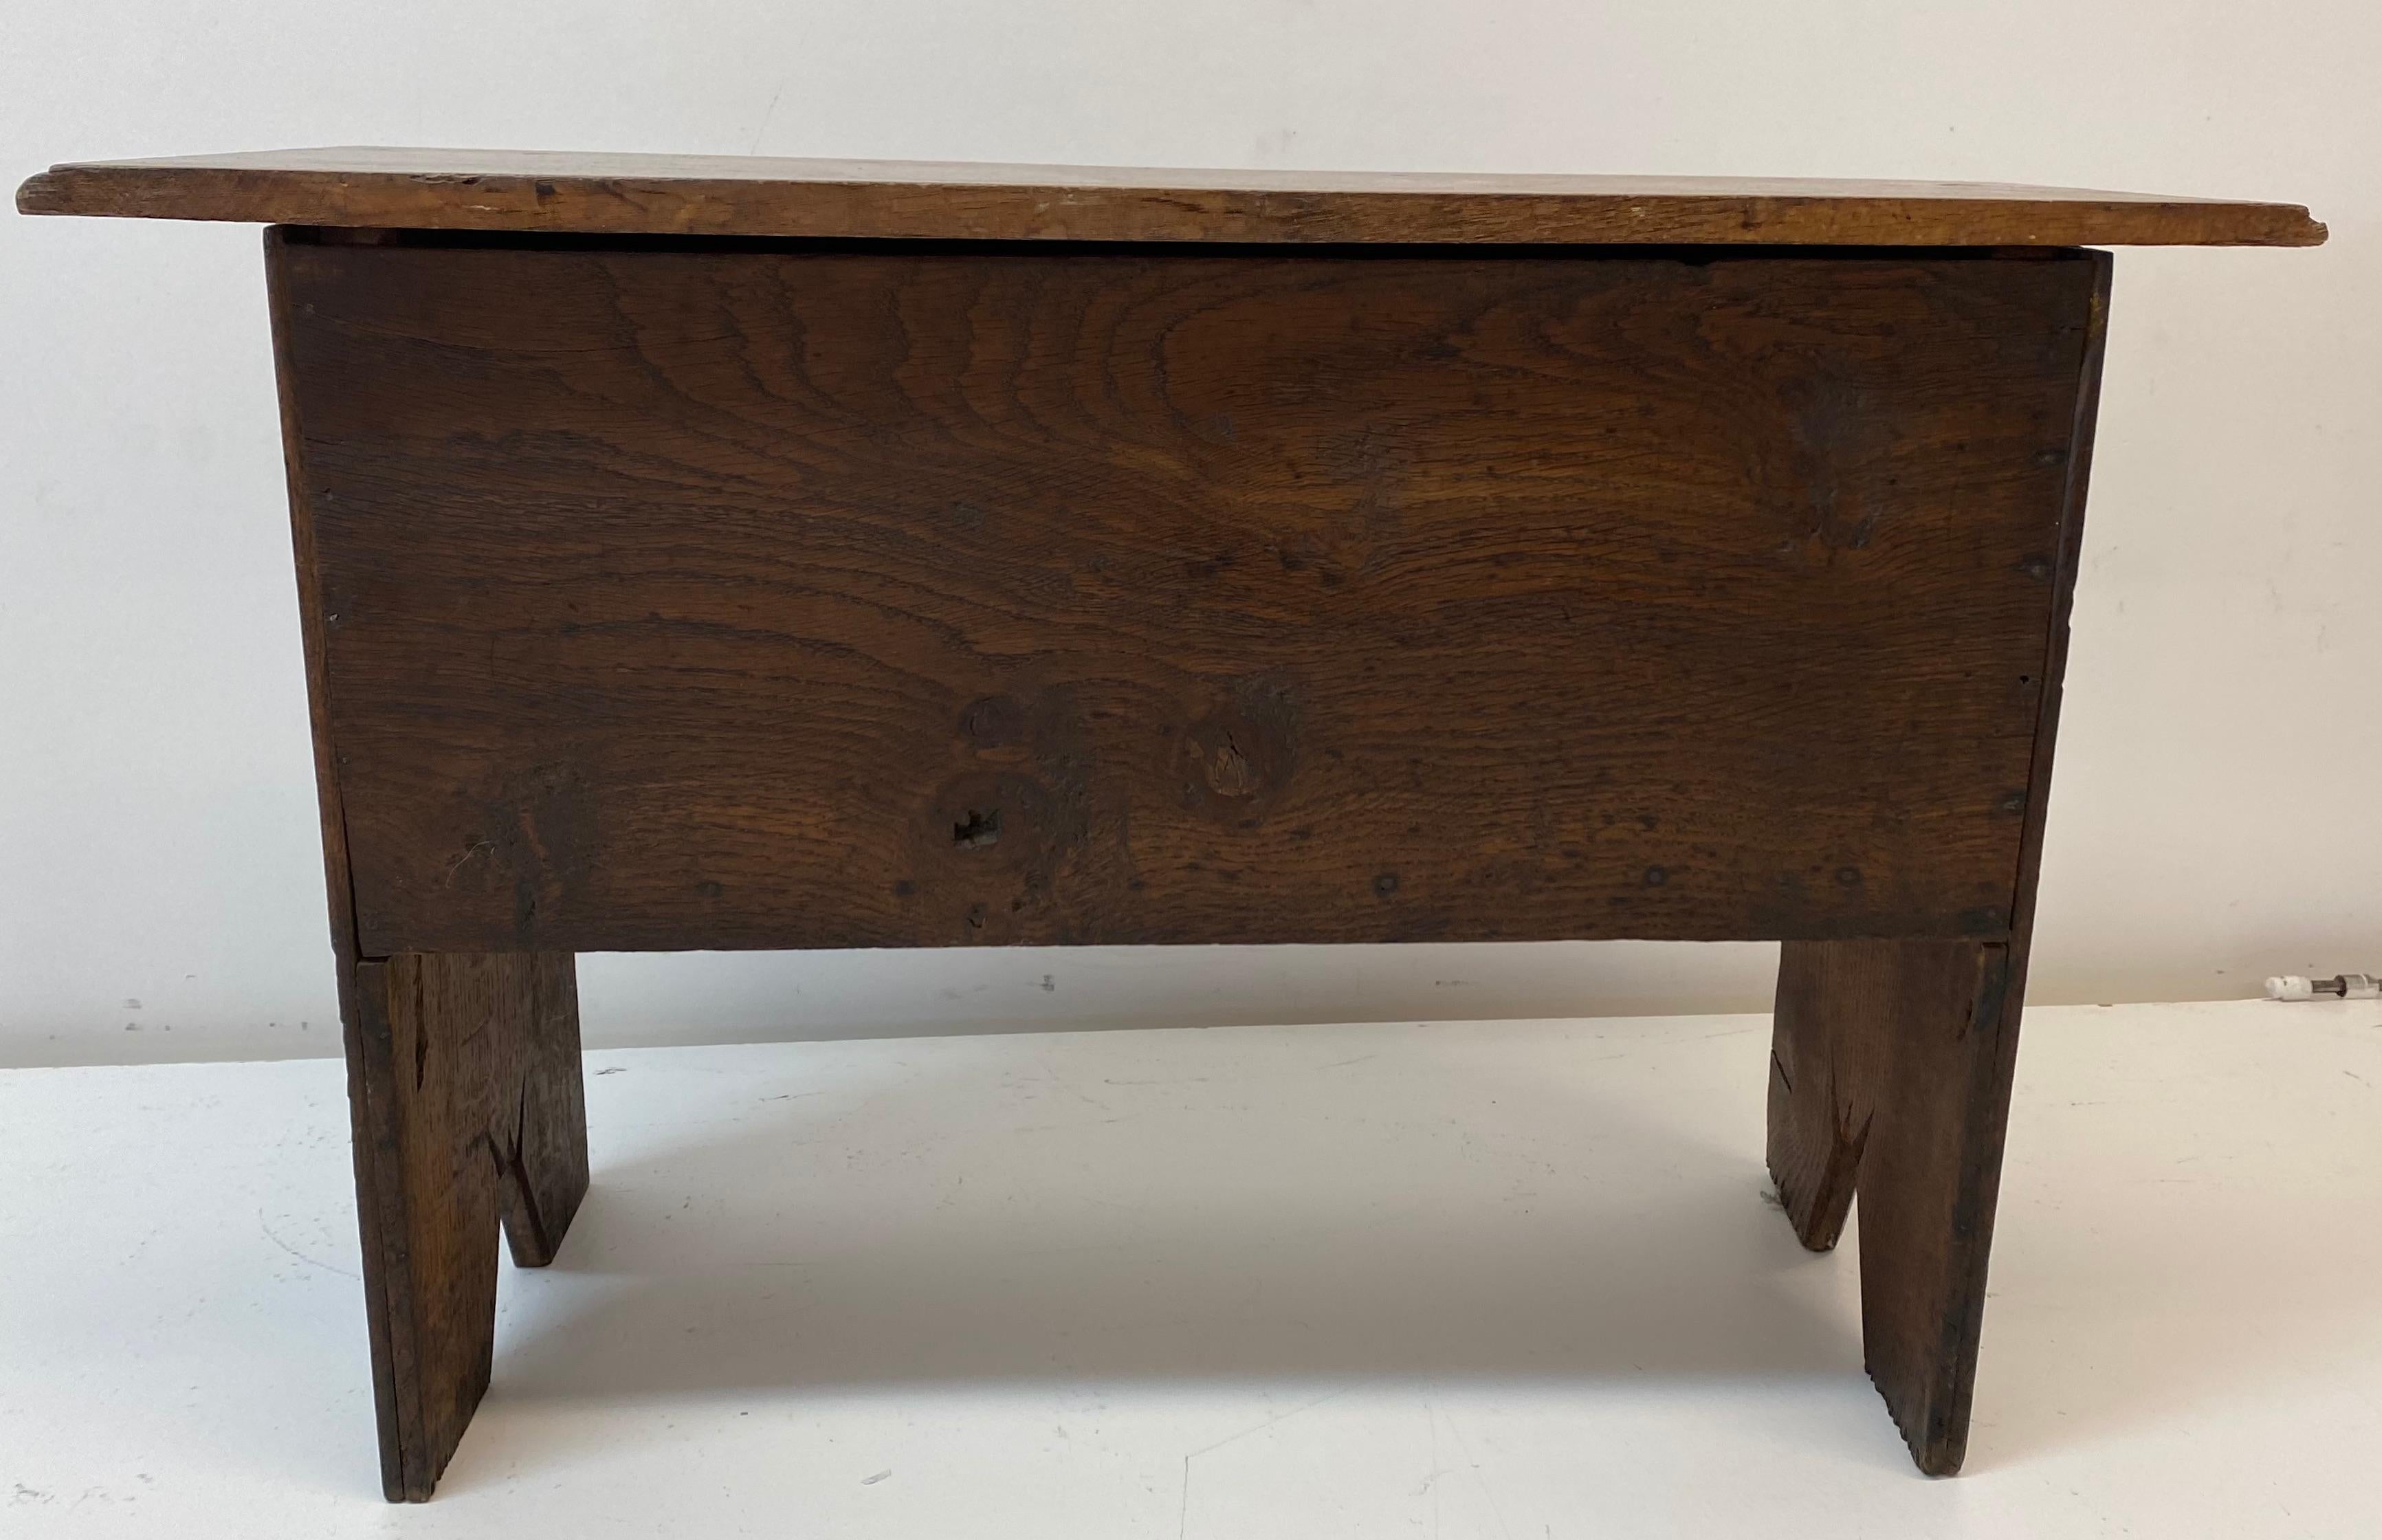 18th to 19th Century Lidded Oak Low Stool with Interior Storage In Good Condition For Sale In San Francisco, CA